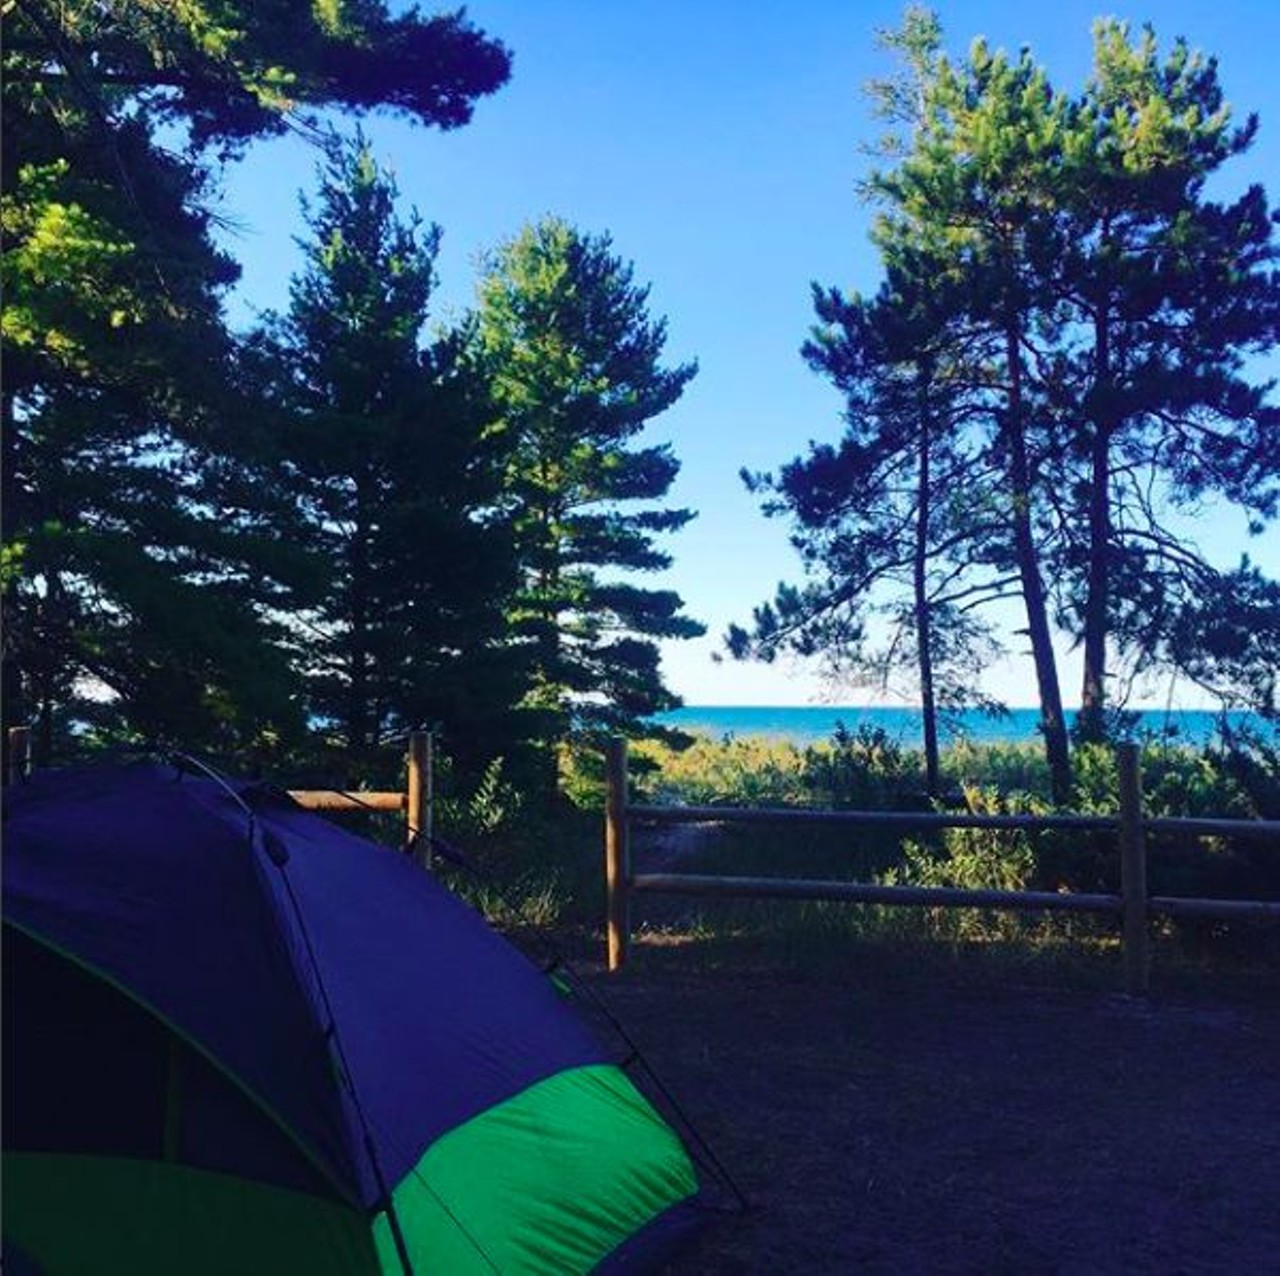 Ossineke State Forest Campground
Ossineke, MI
This rustic campground is a hidden gem spread out along the shore of Lake Huron. Set up camp among the trees, go for a hike on the mile-long trail in the park and then take the boardwalk out to the beach to end your day watching the sunset over the lake. 
Photo via IG user @pamfossett